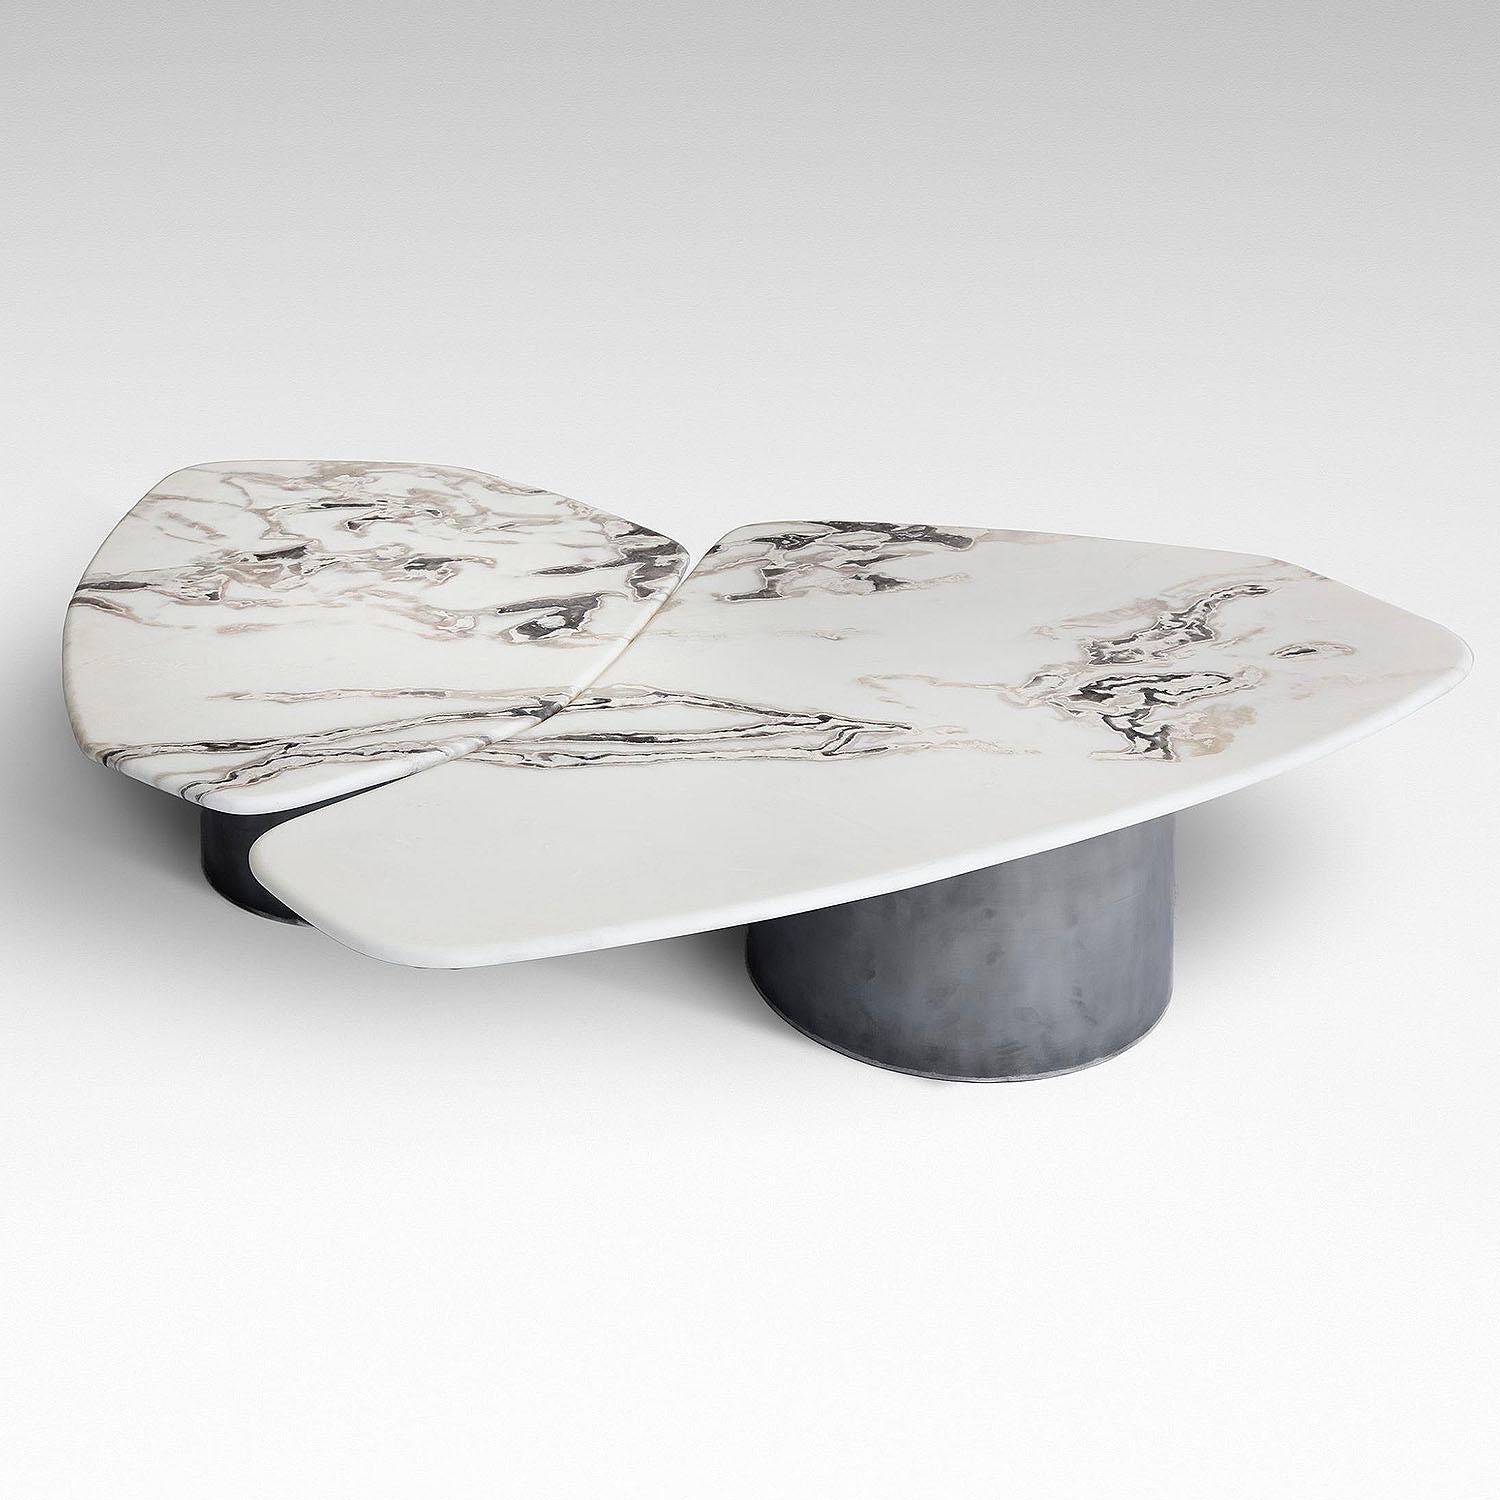 Contemporary marble coffee table - Tectra 2 by Adam Court for OKHA

Design: Adam Court

Base: patinated blue black mild steel / powdercoated mild steel
Marble Top: Nero Marquina / Verde Guatemala / Carrara / Rosso Levante / Calacatta